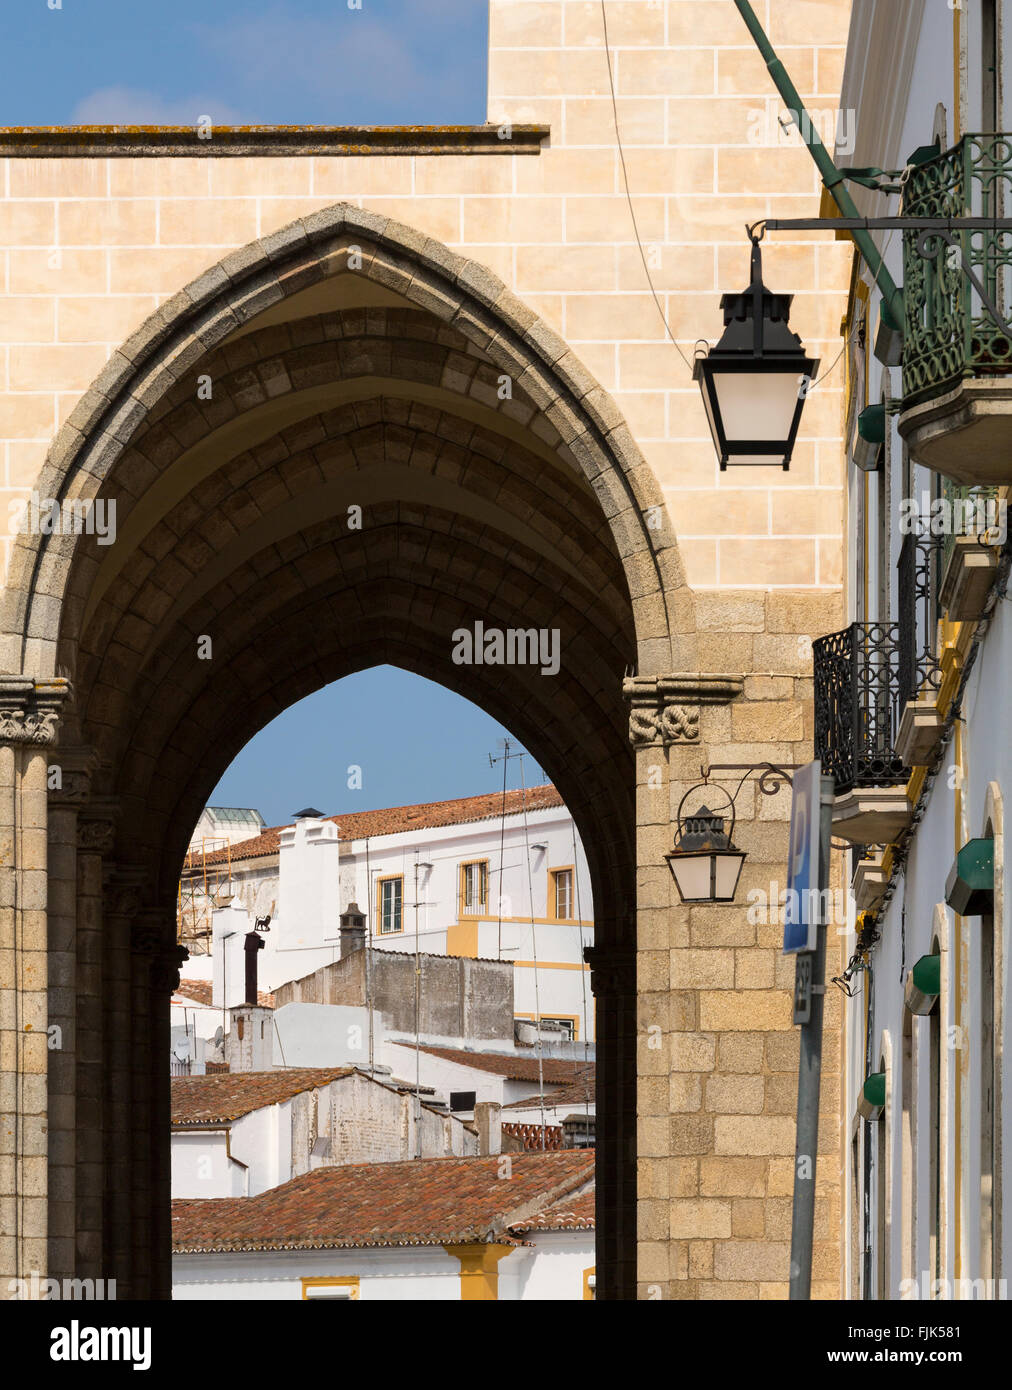 Typical architecture and view of town through archway, Evora, Alentejo region, Portugal Stock Photo